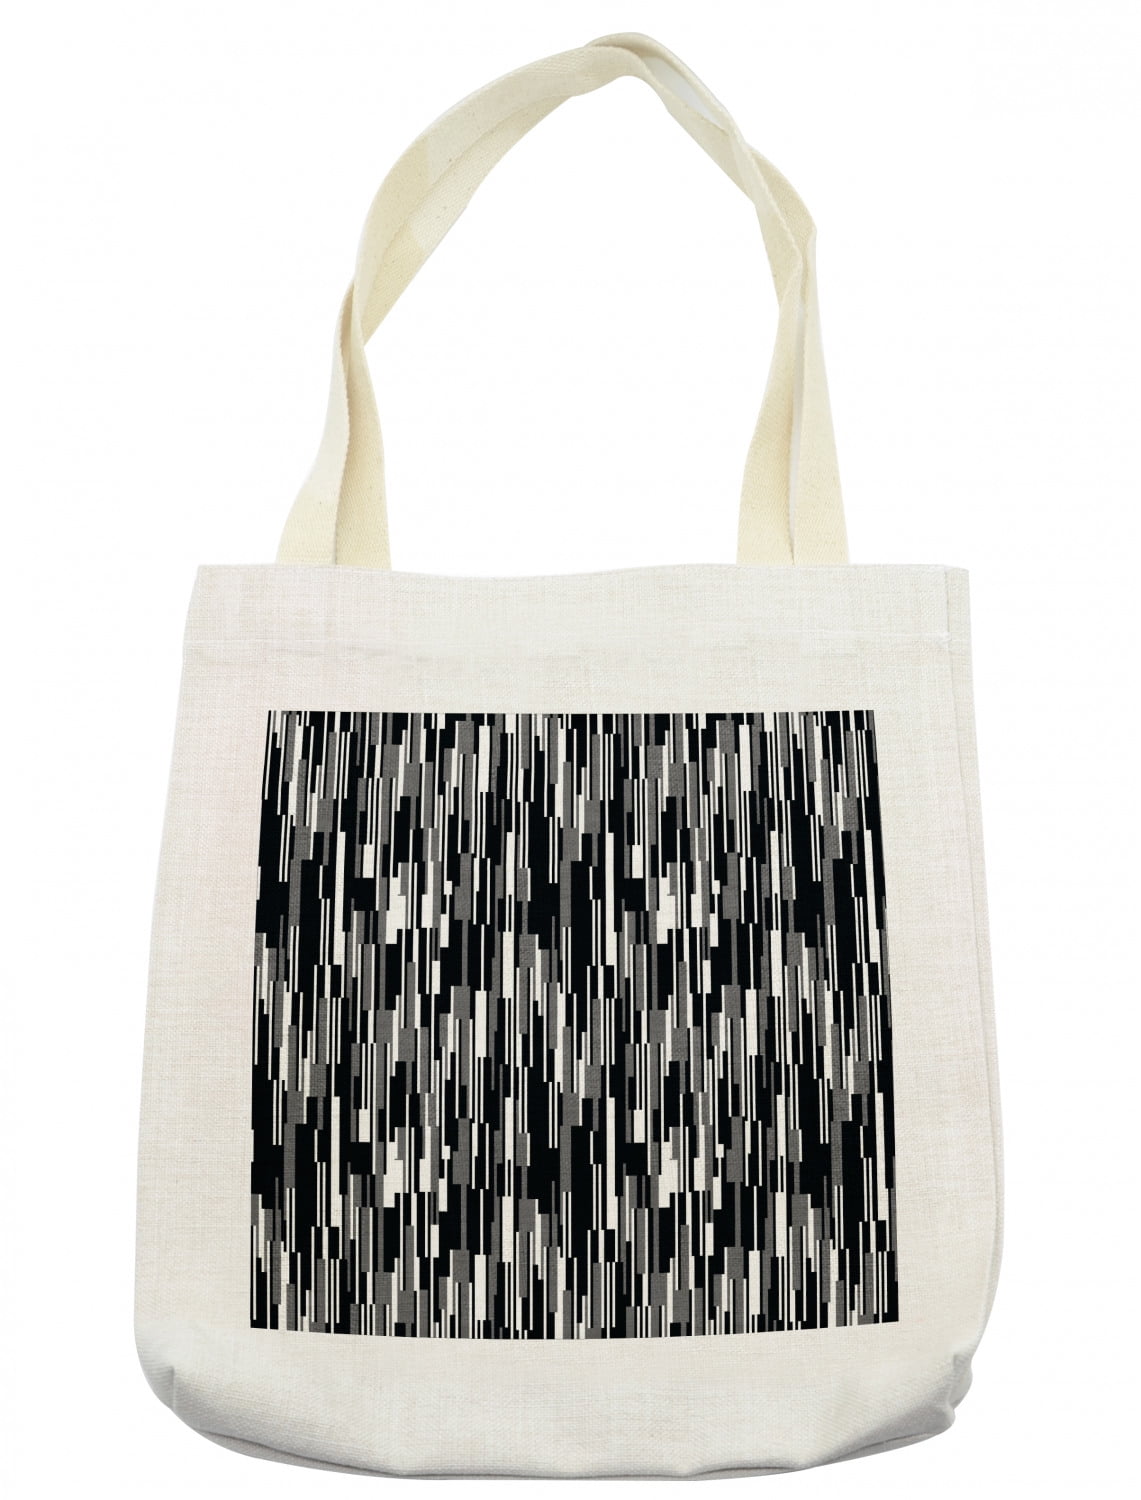 Black and White Tote Bag, Barcode Pattern Abstraction Vertical Stripes ...